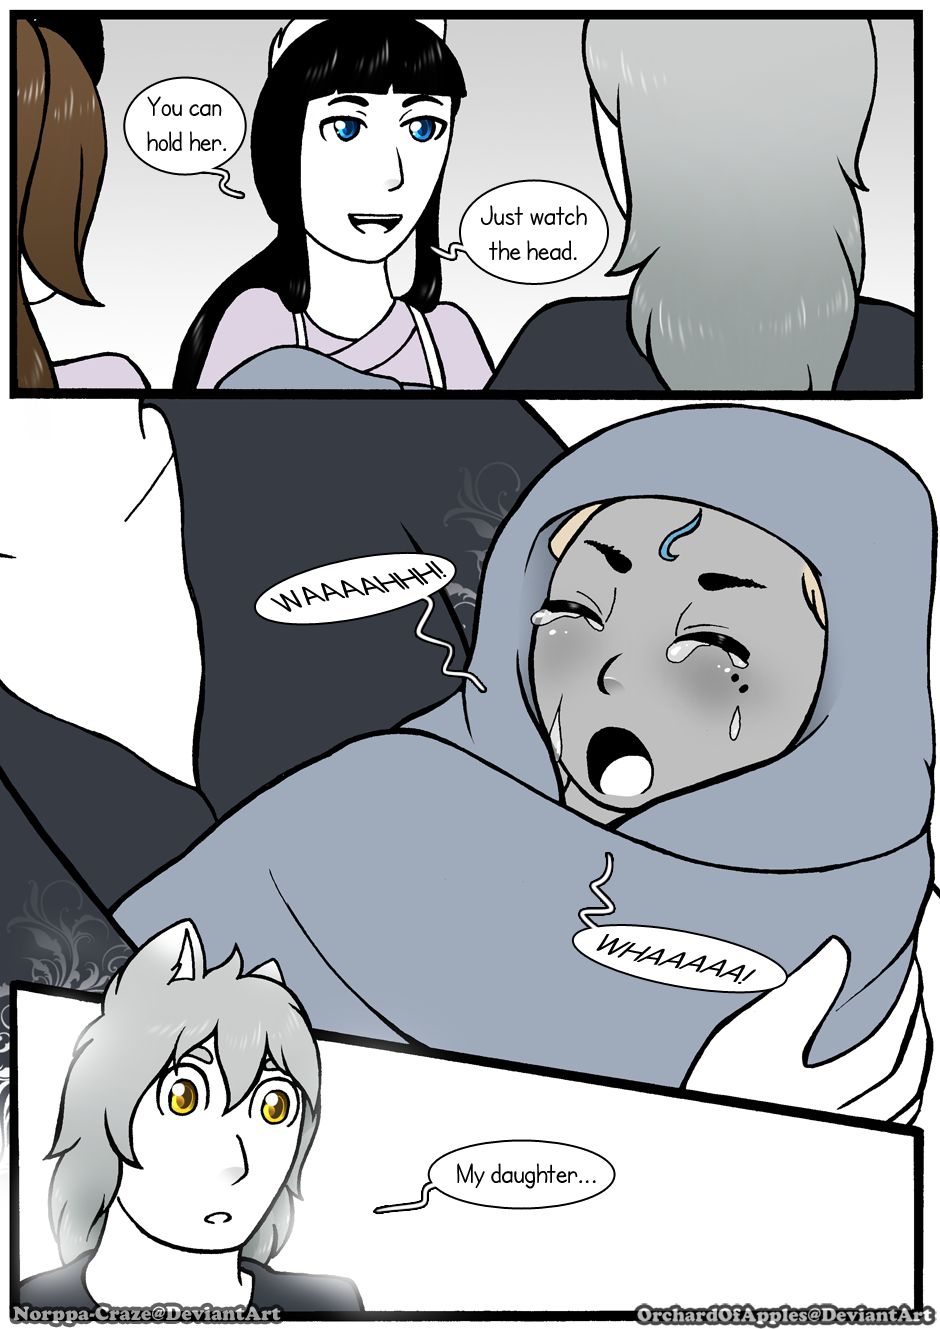 [Jeny-jen94] Between Kings and Queens [Ongoing] 329